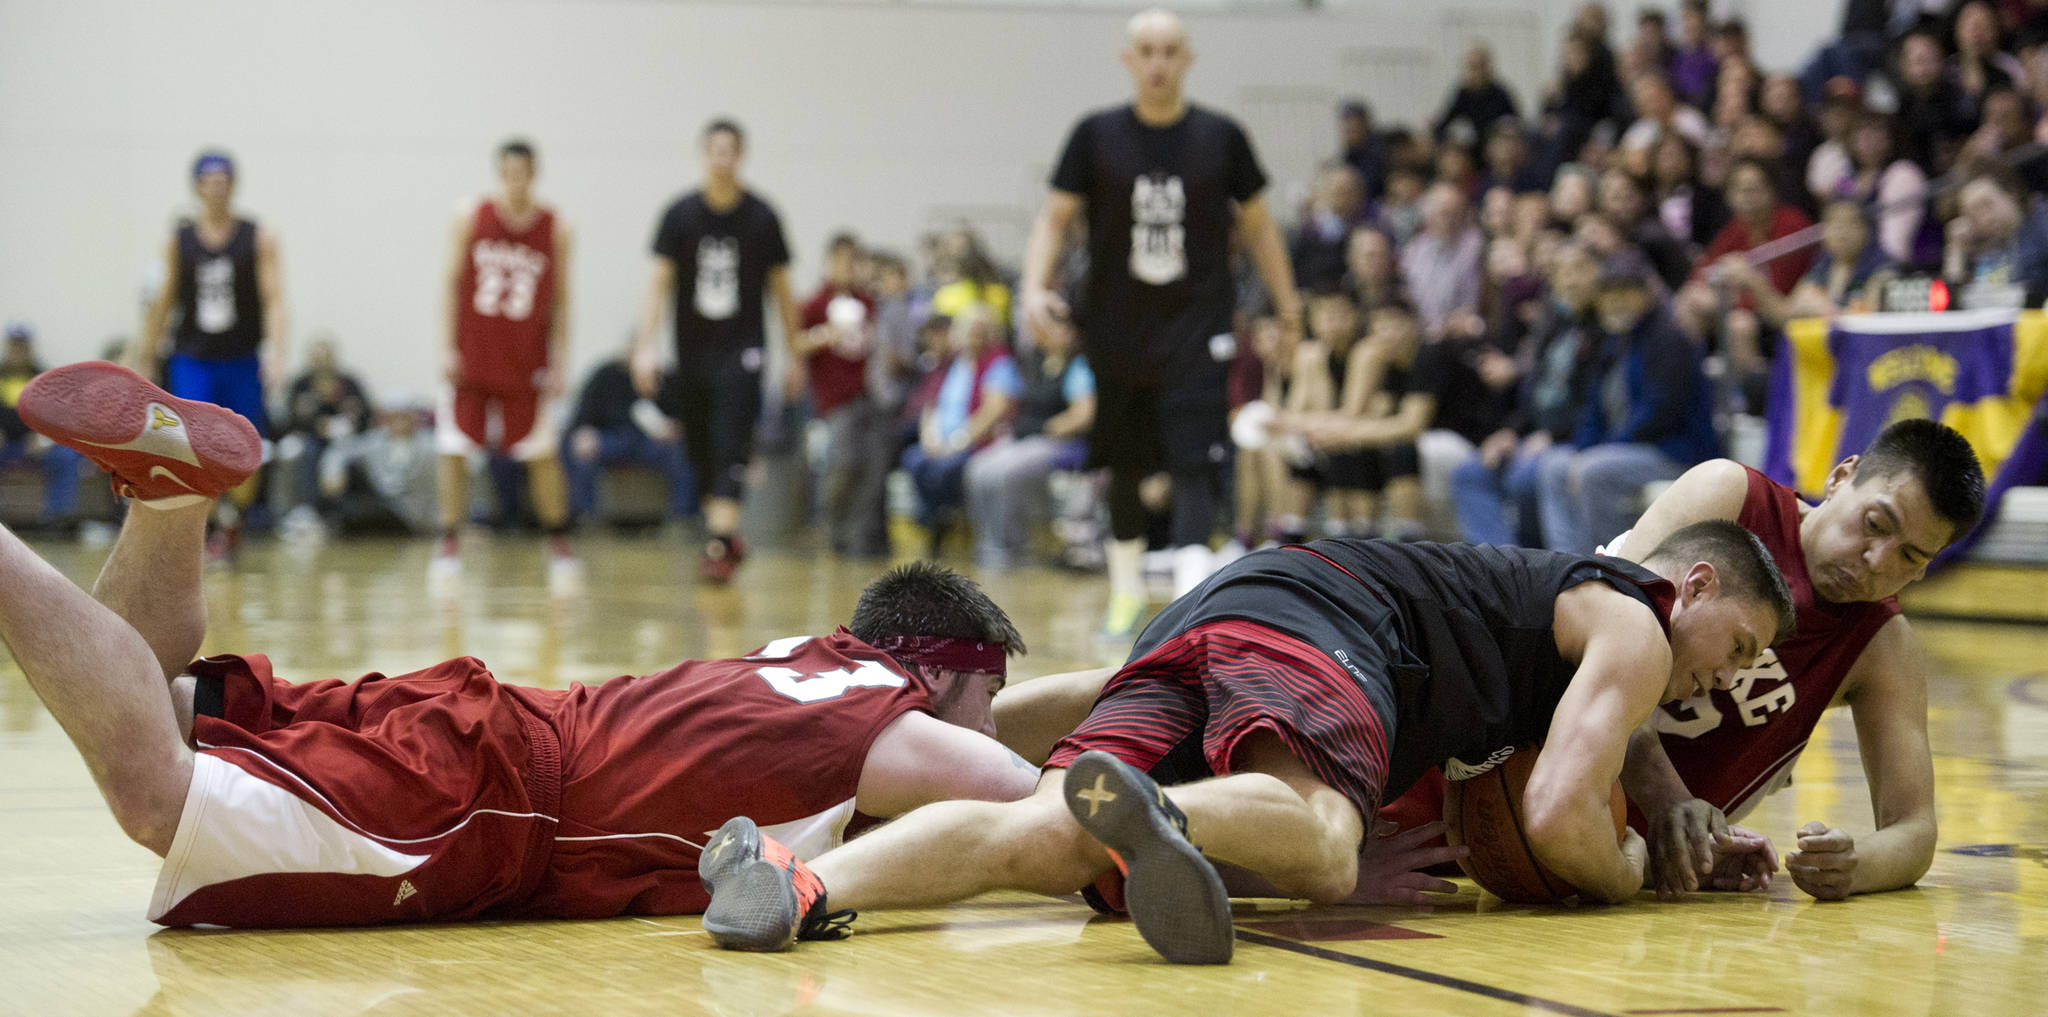 Hydaburg’s Vinny Edenshaw, center, wrestles a loose ball away from Kake’s Lance Doake, right, and Shea Jackson during their B bracket game in the 2016 Juneau Lions Club 70th Gold Medal Basketball Tournament at Juneau-Douglas High School on March 24, 2016. Hydaburg won 76-72. (Michael Penn | Juneau Empire File)